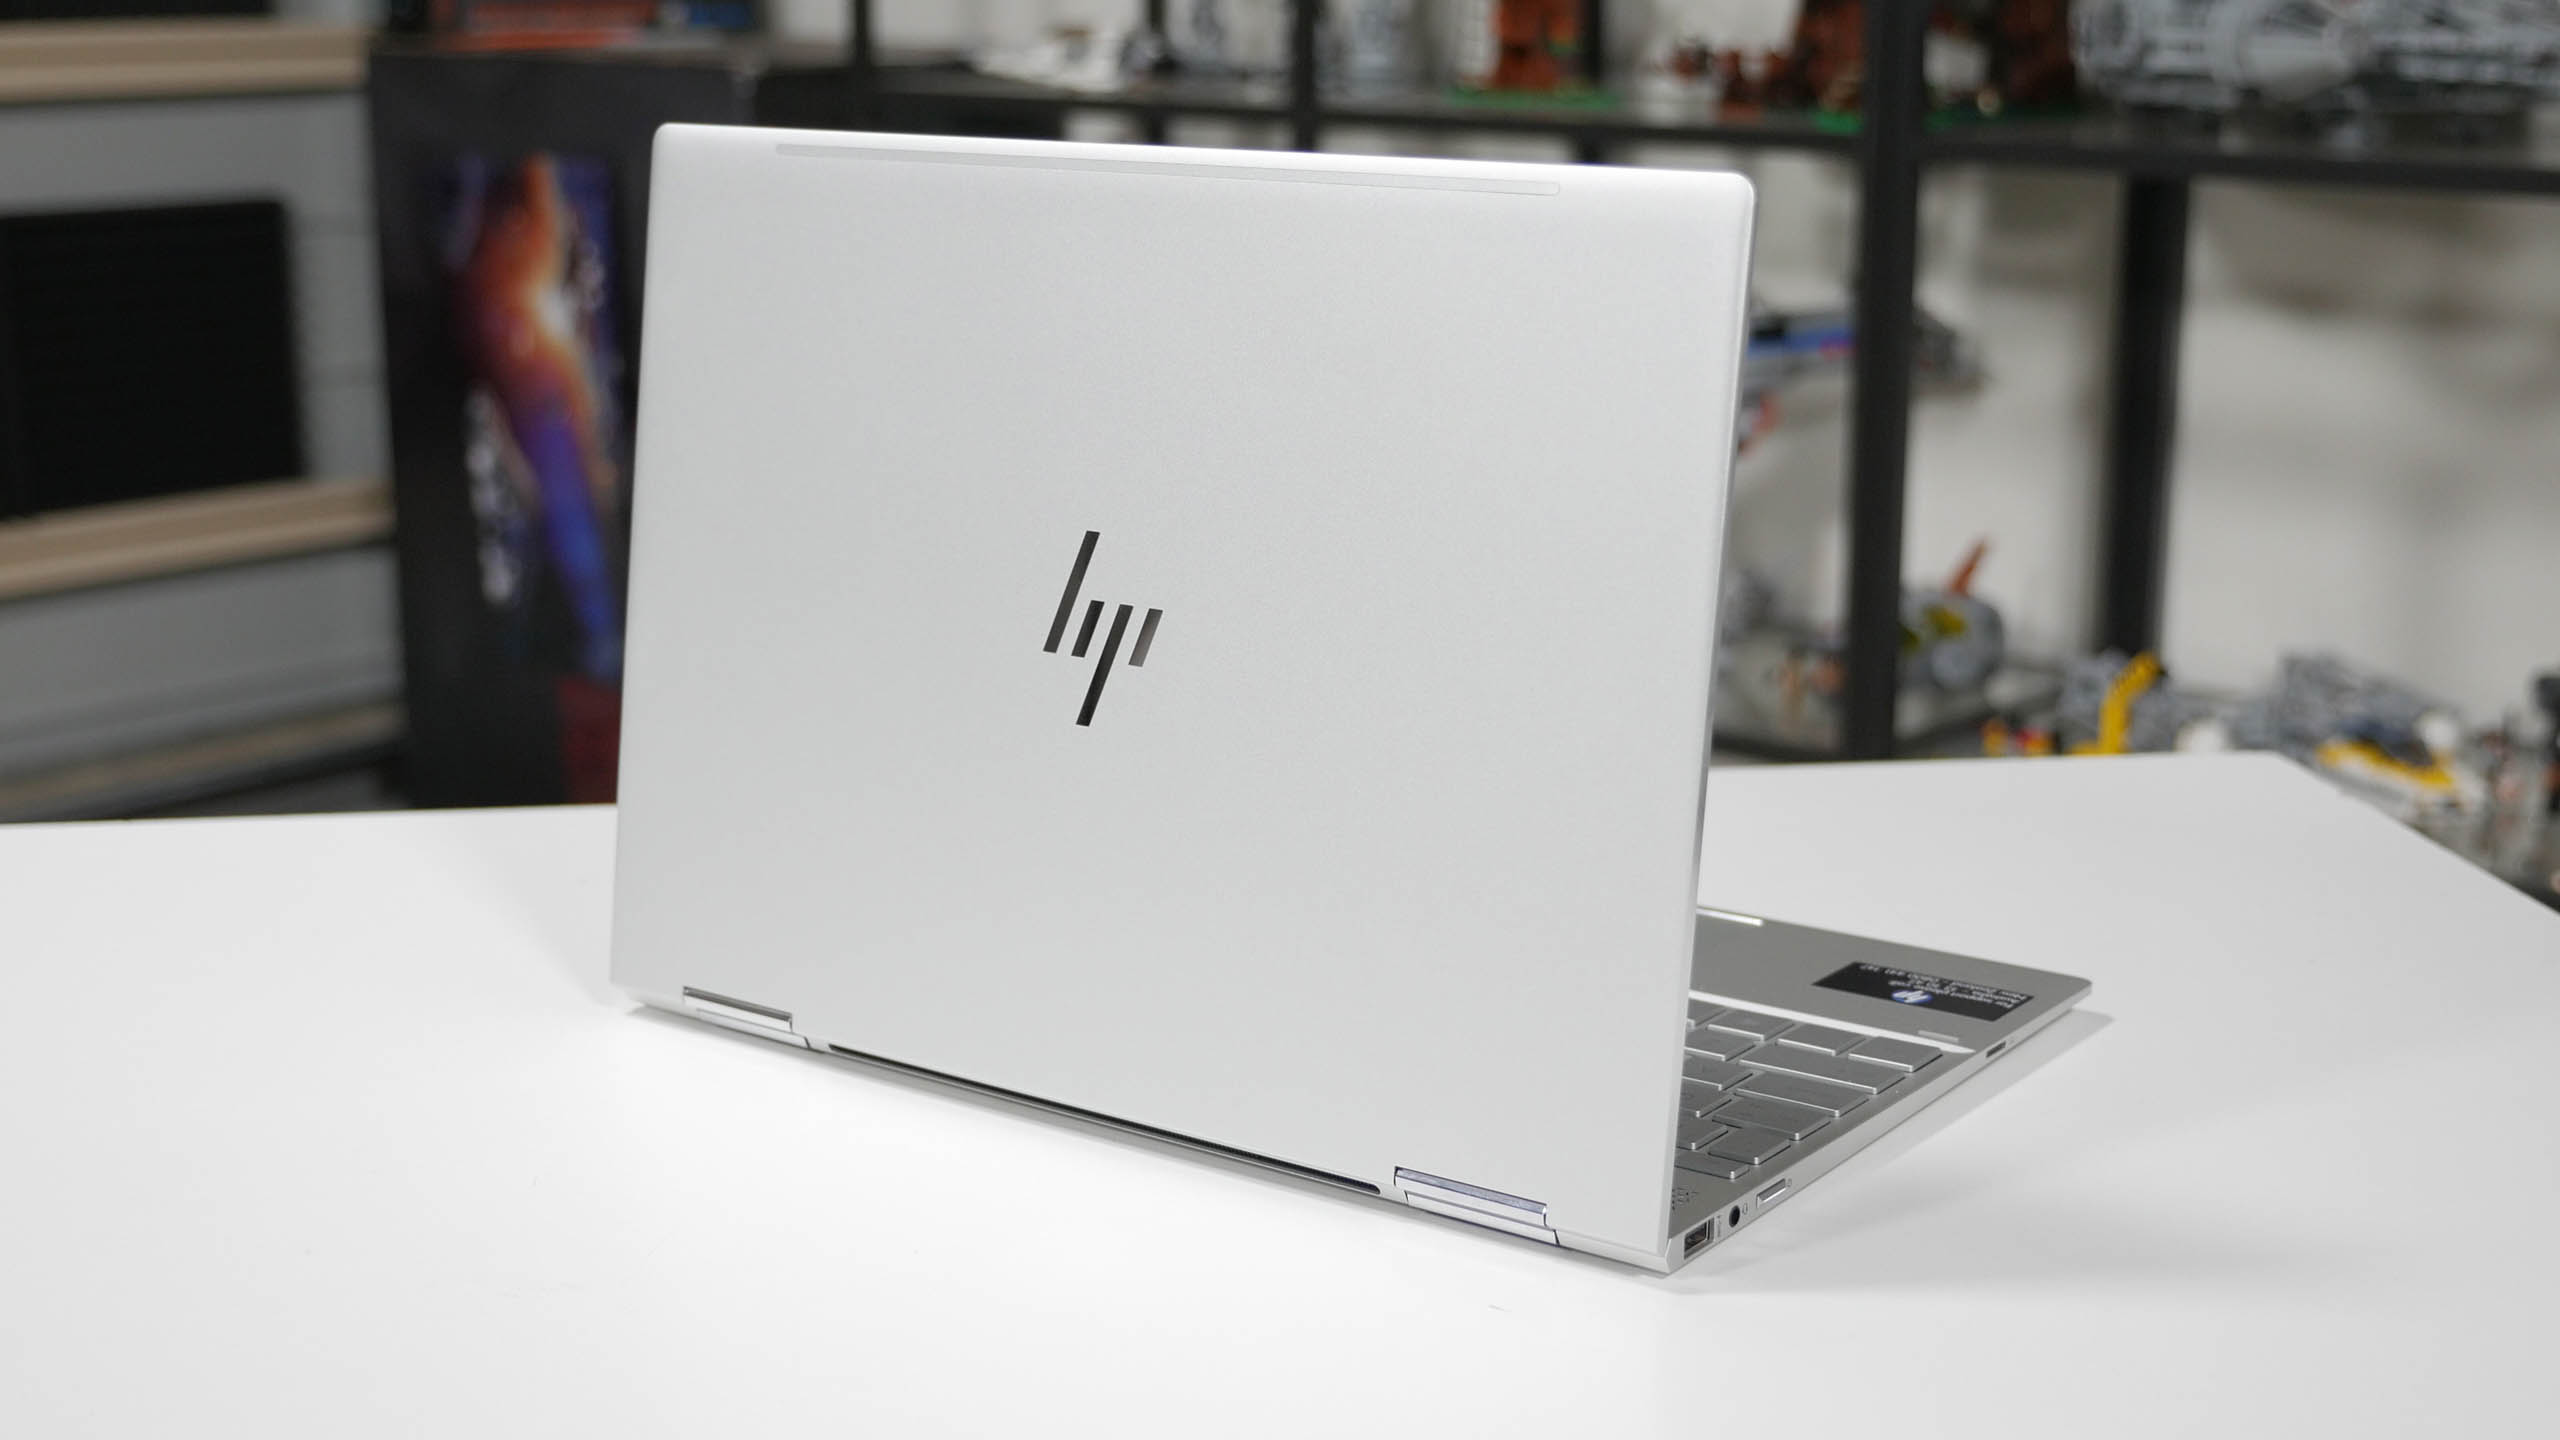 Hp S Labor Day Sale Is Live Great Deals On Laptops Monitors Printers And More